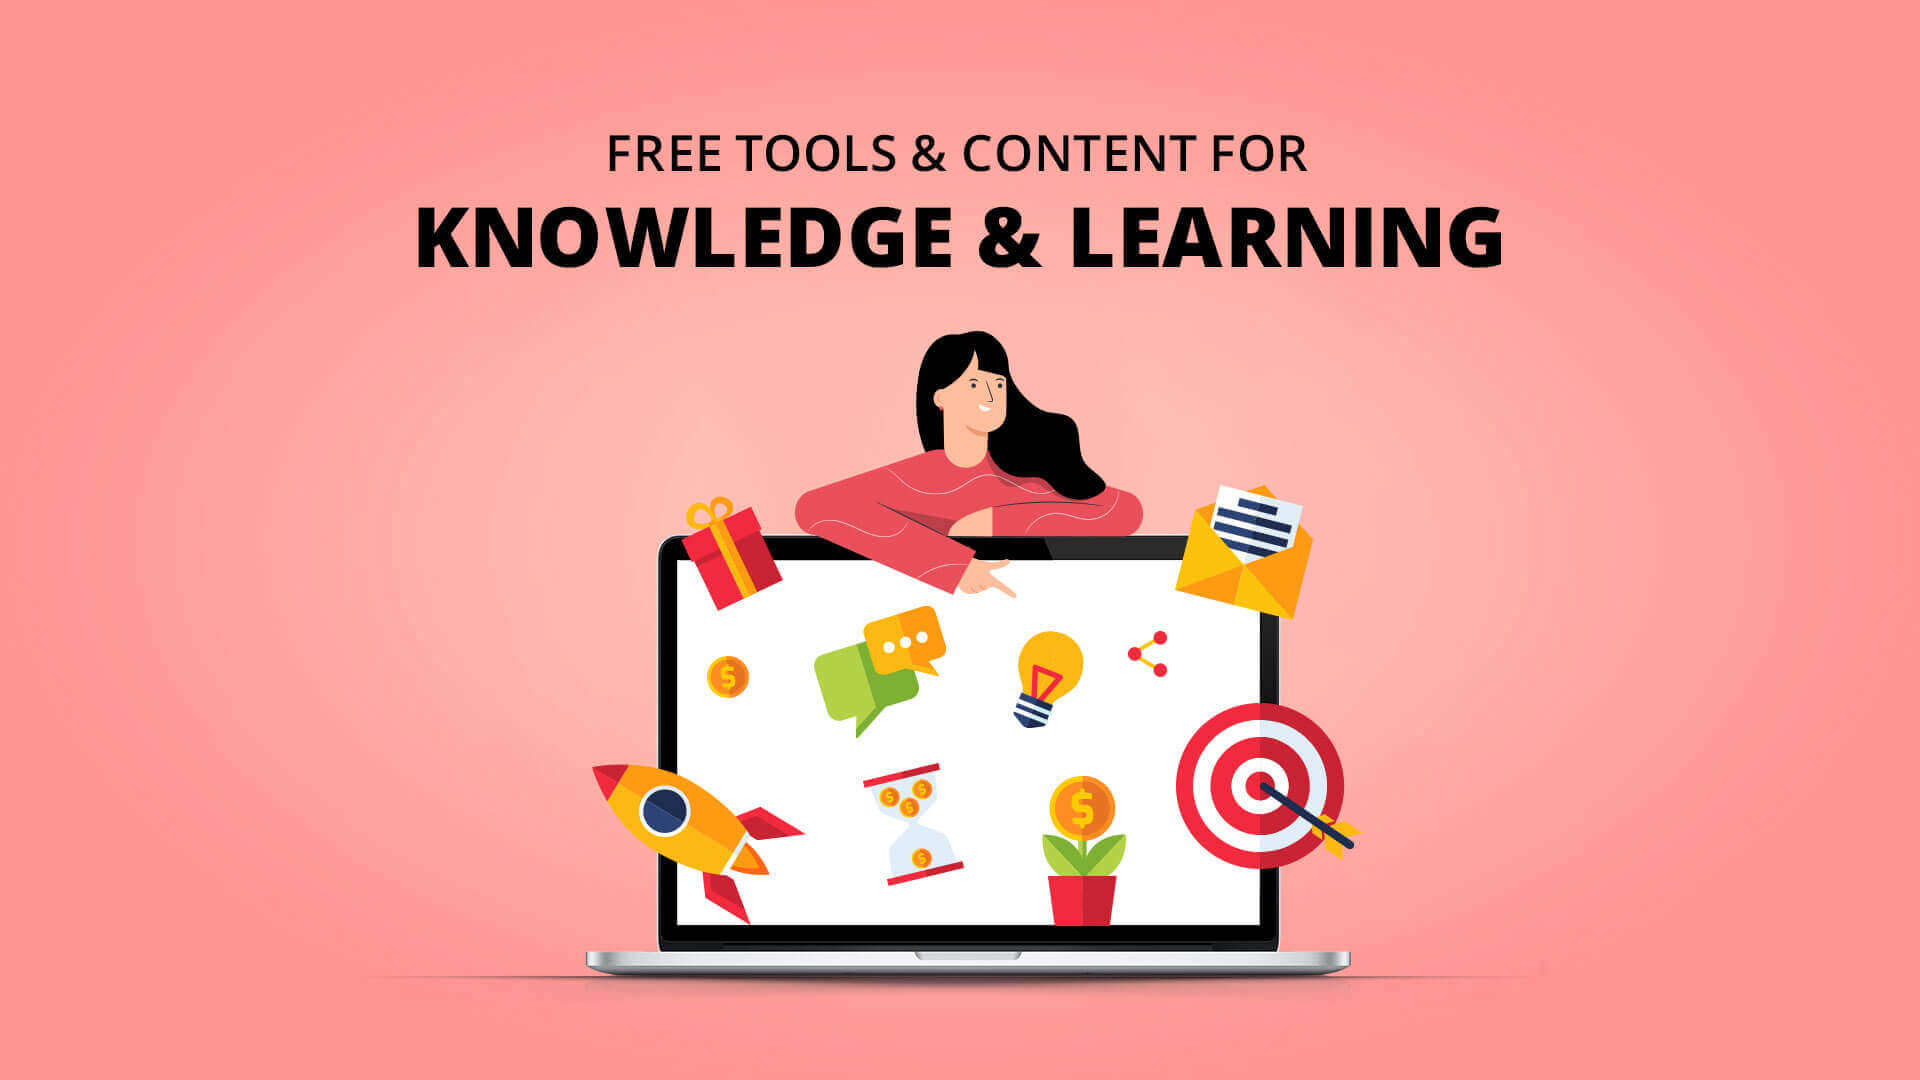 Free Tools & Content for Knowledge & Learning